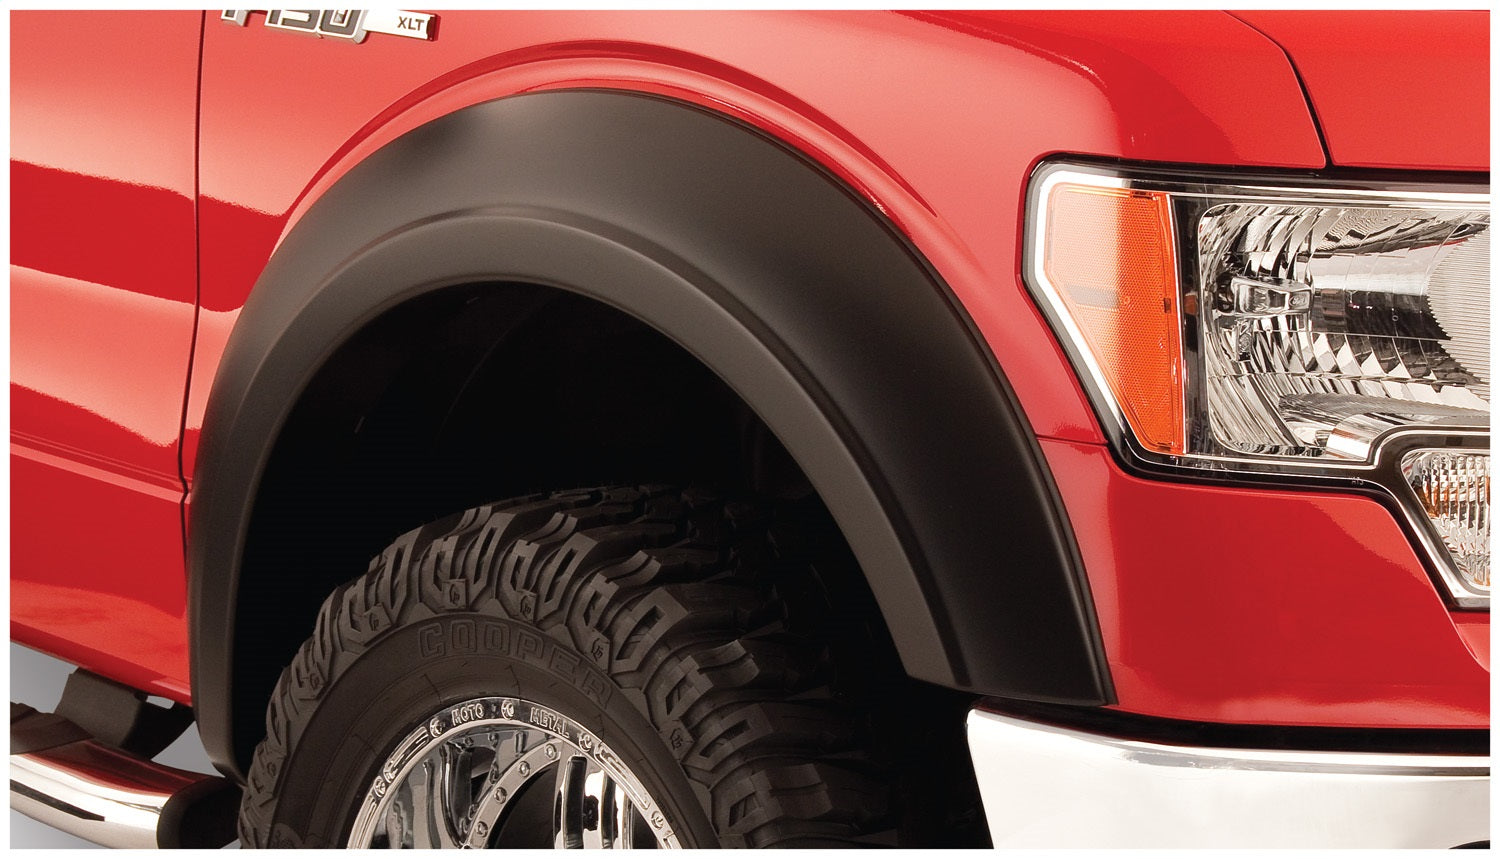 Bushwacker 20019-11 Black Extend-A-Fender Style Smooth Finish Front Fender Flares for 1992-1996 Ford Bronco, F-150, F-250; 1992-1997 F-350 Super Duty (Excludes Dually)